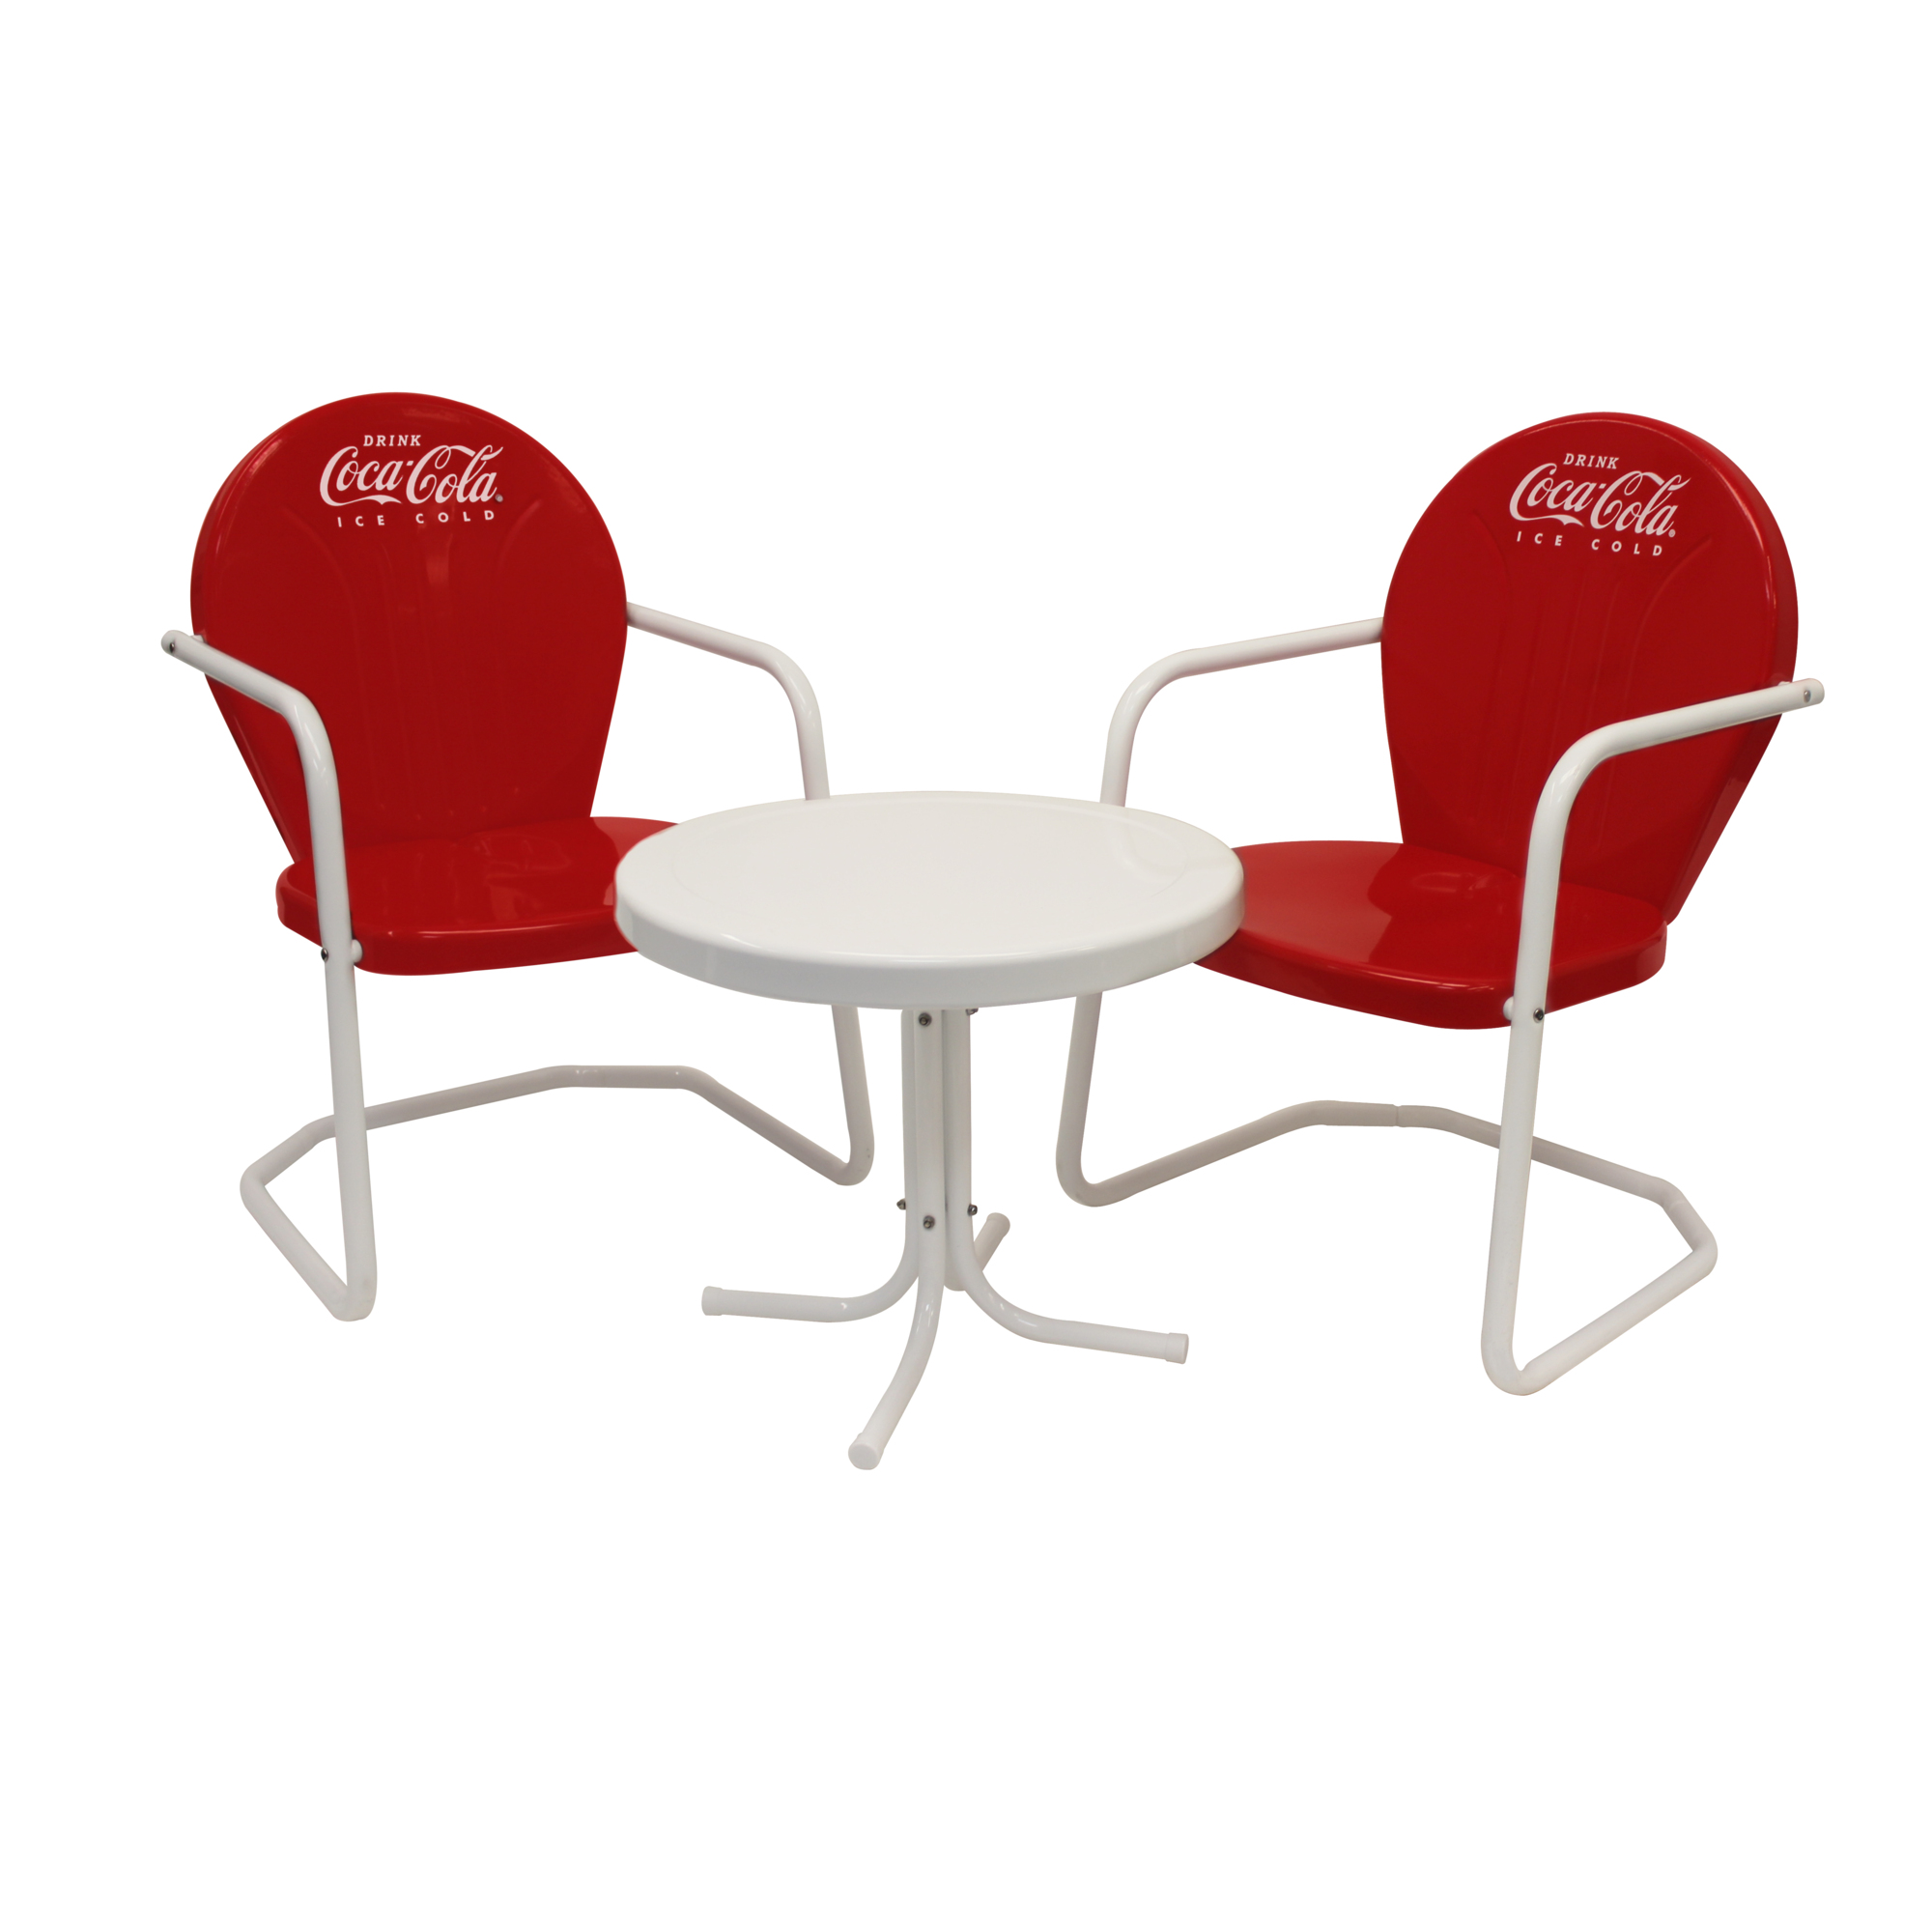 Leigh Country, Coca-Cola Retro Bistro Set, Pieces (qty.) 3, Primary Color Red, Seating Capacity 2, Model CP 98015